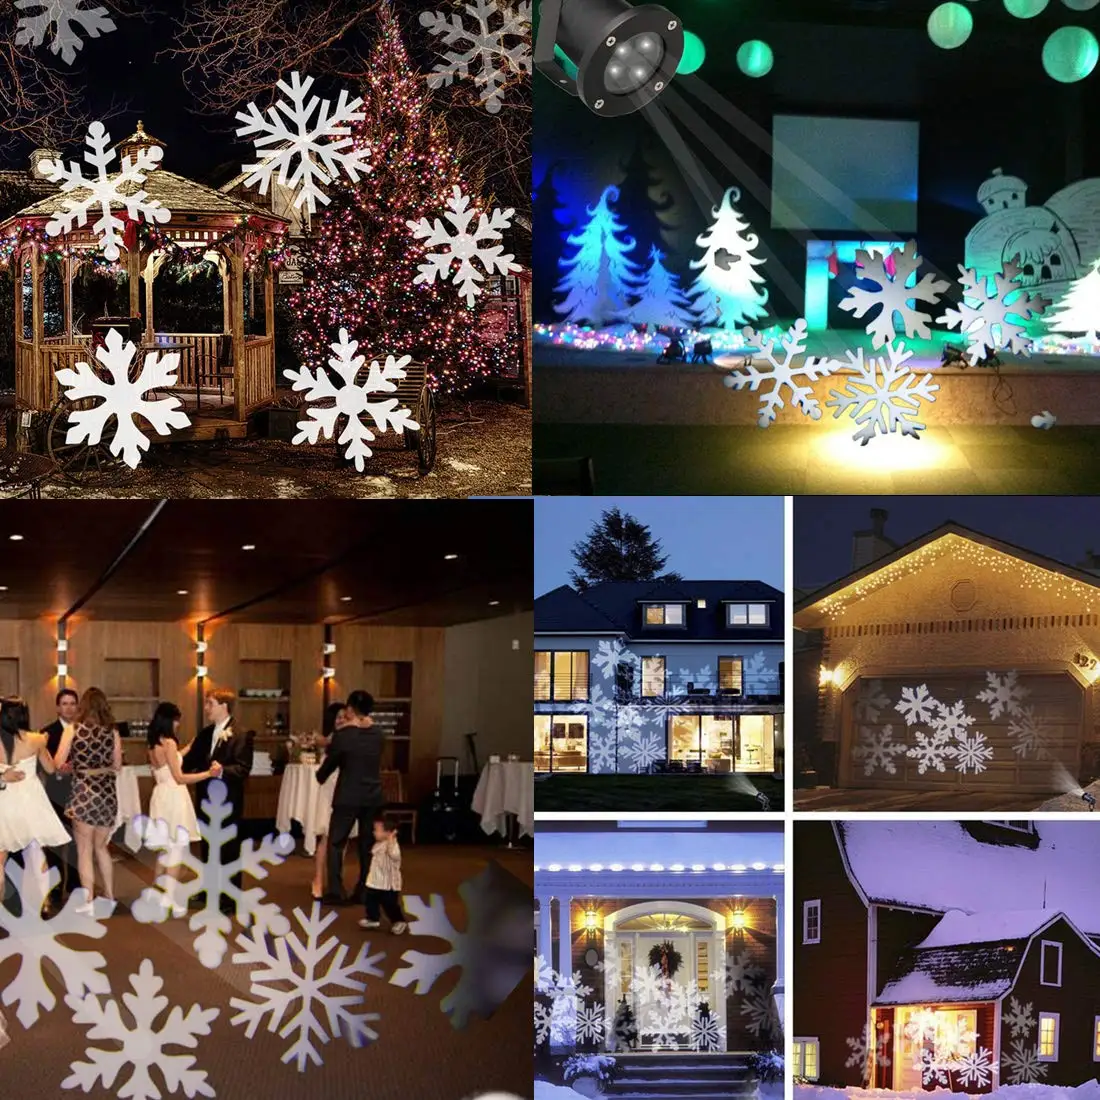 led christmas light projector outdoor